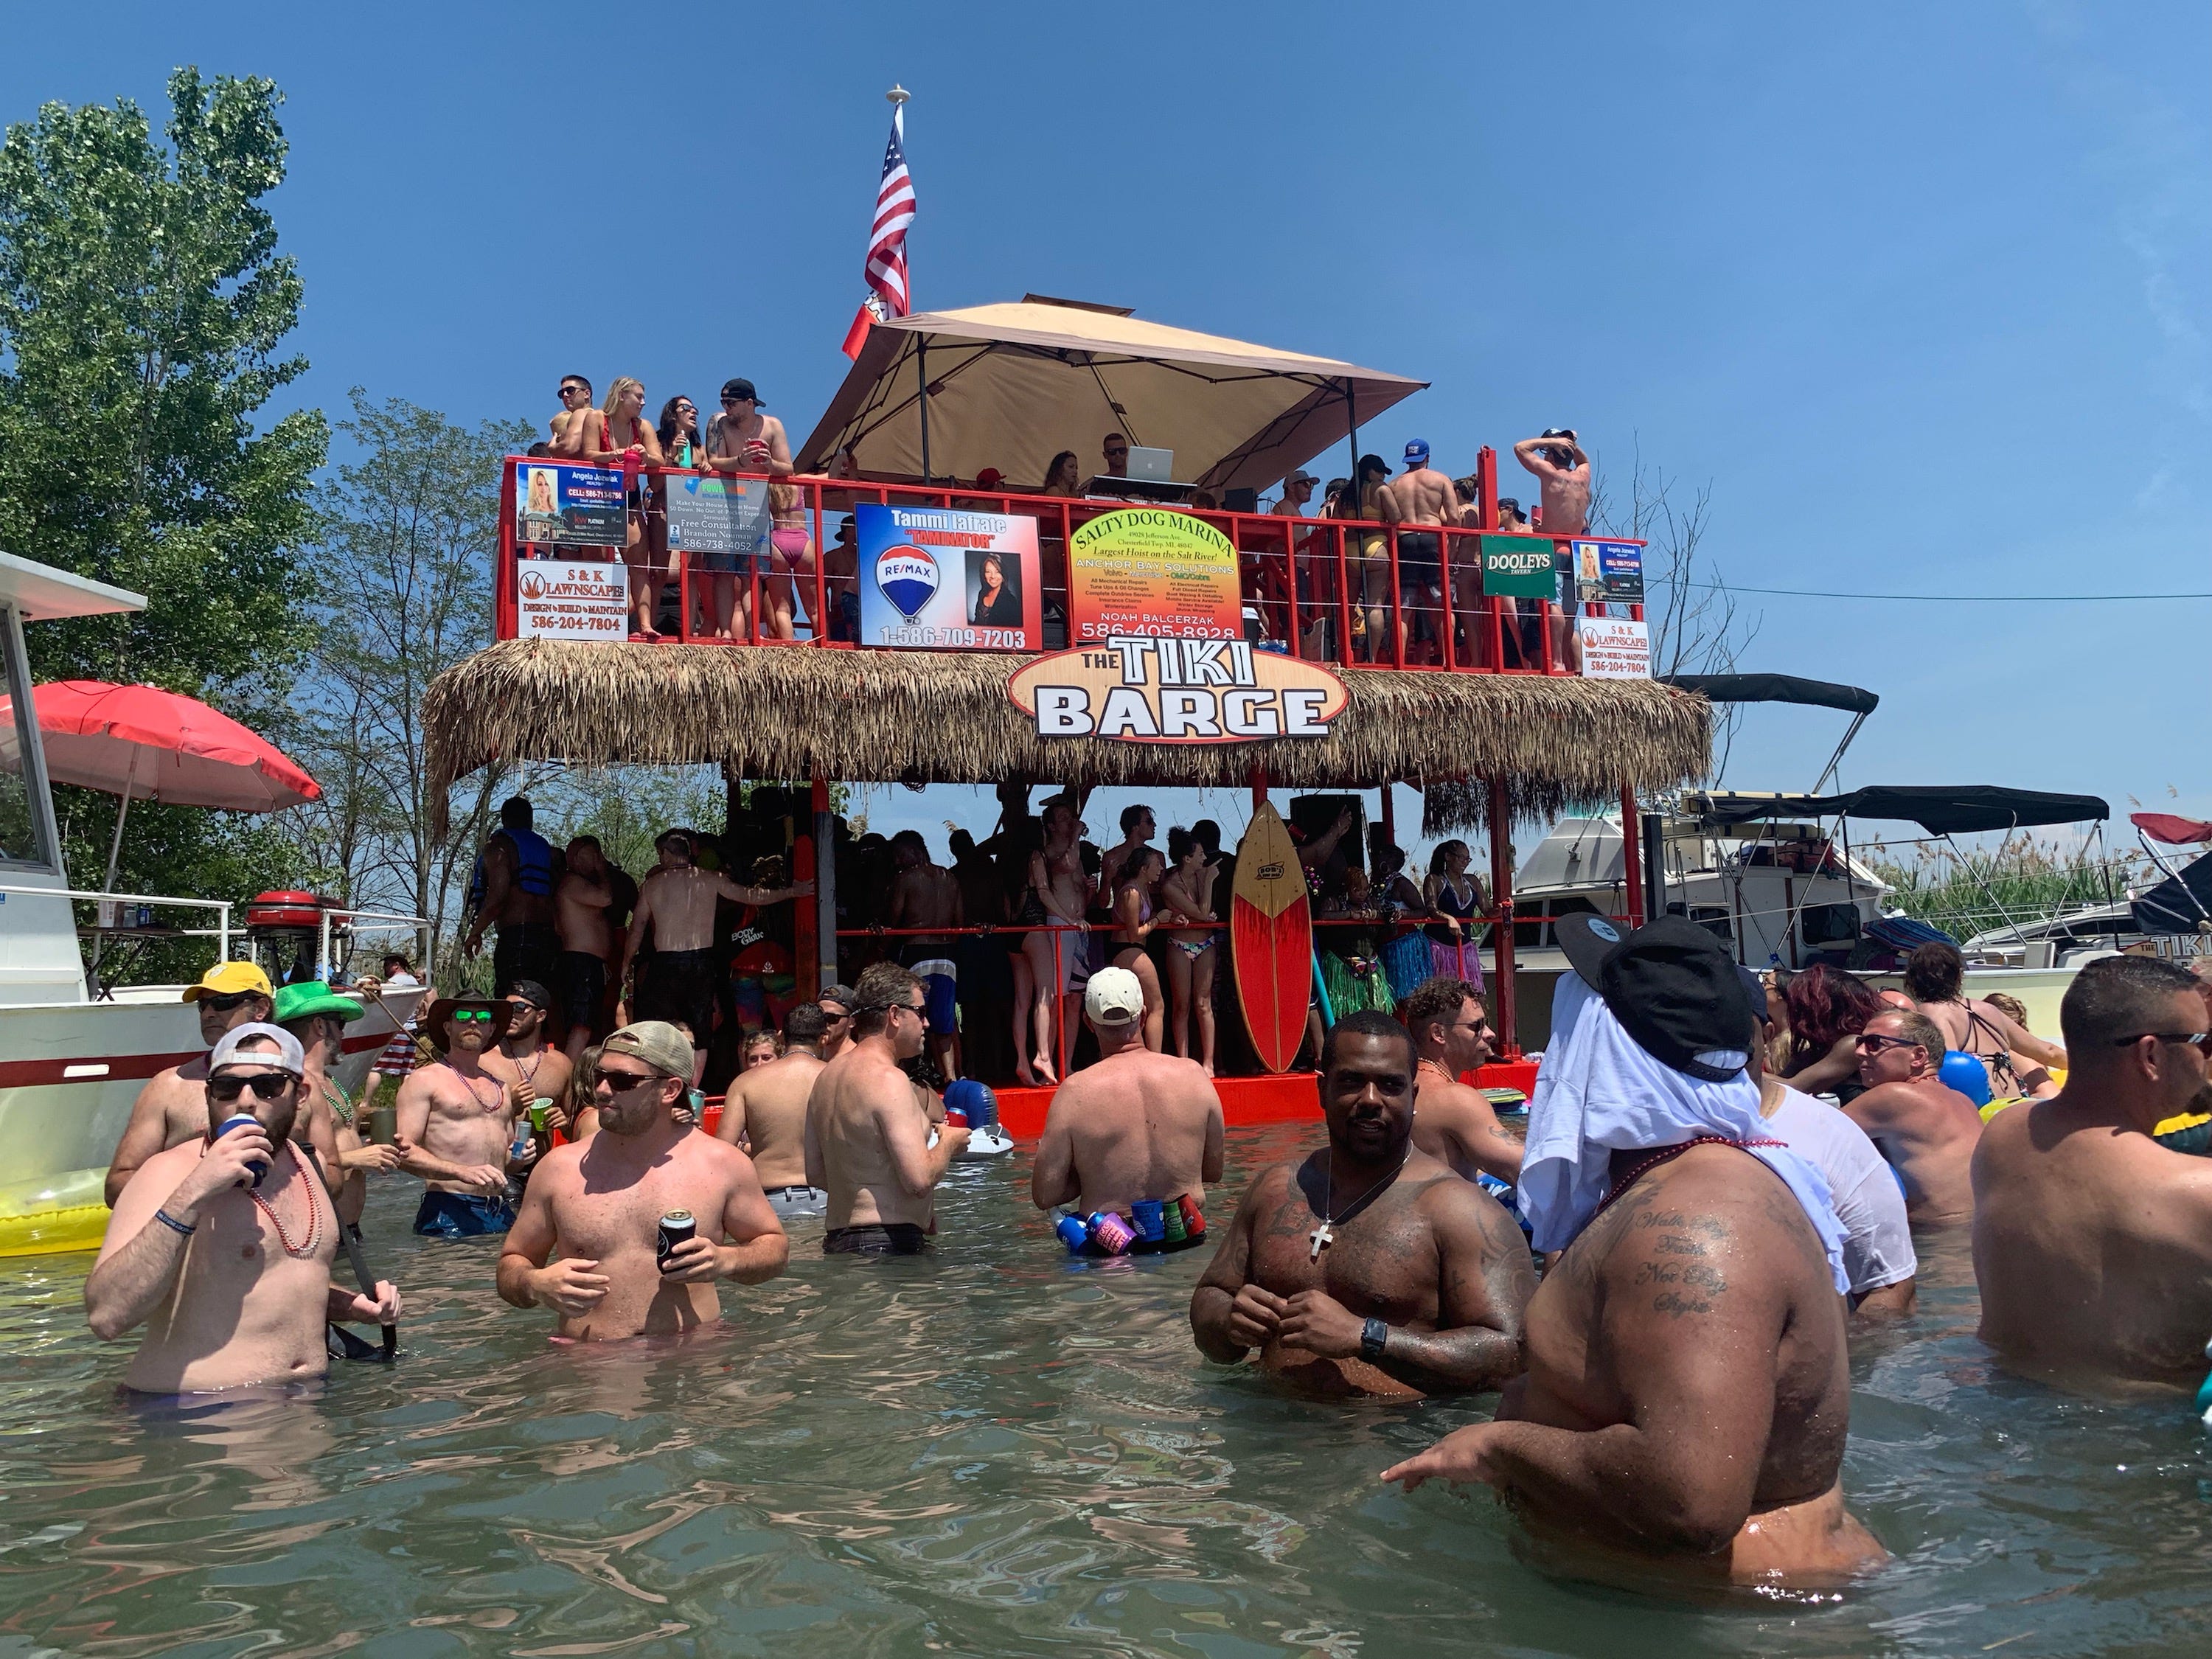 Jobbie Nooner revelers congregate in waist-high waters surrounding the Tiki Barge party boat on what was a beach area in previous years... eliminated this year by high lake water levels on Lake St. Clair at Gull Island Friday, June 28, 2019.